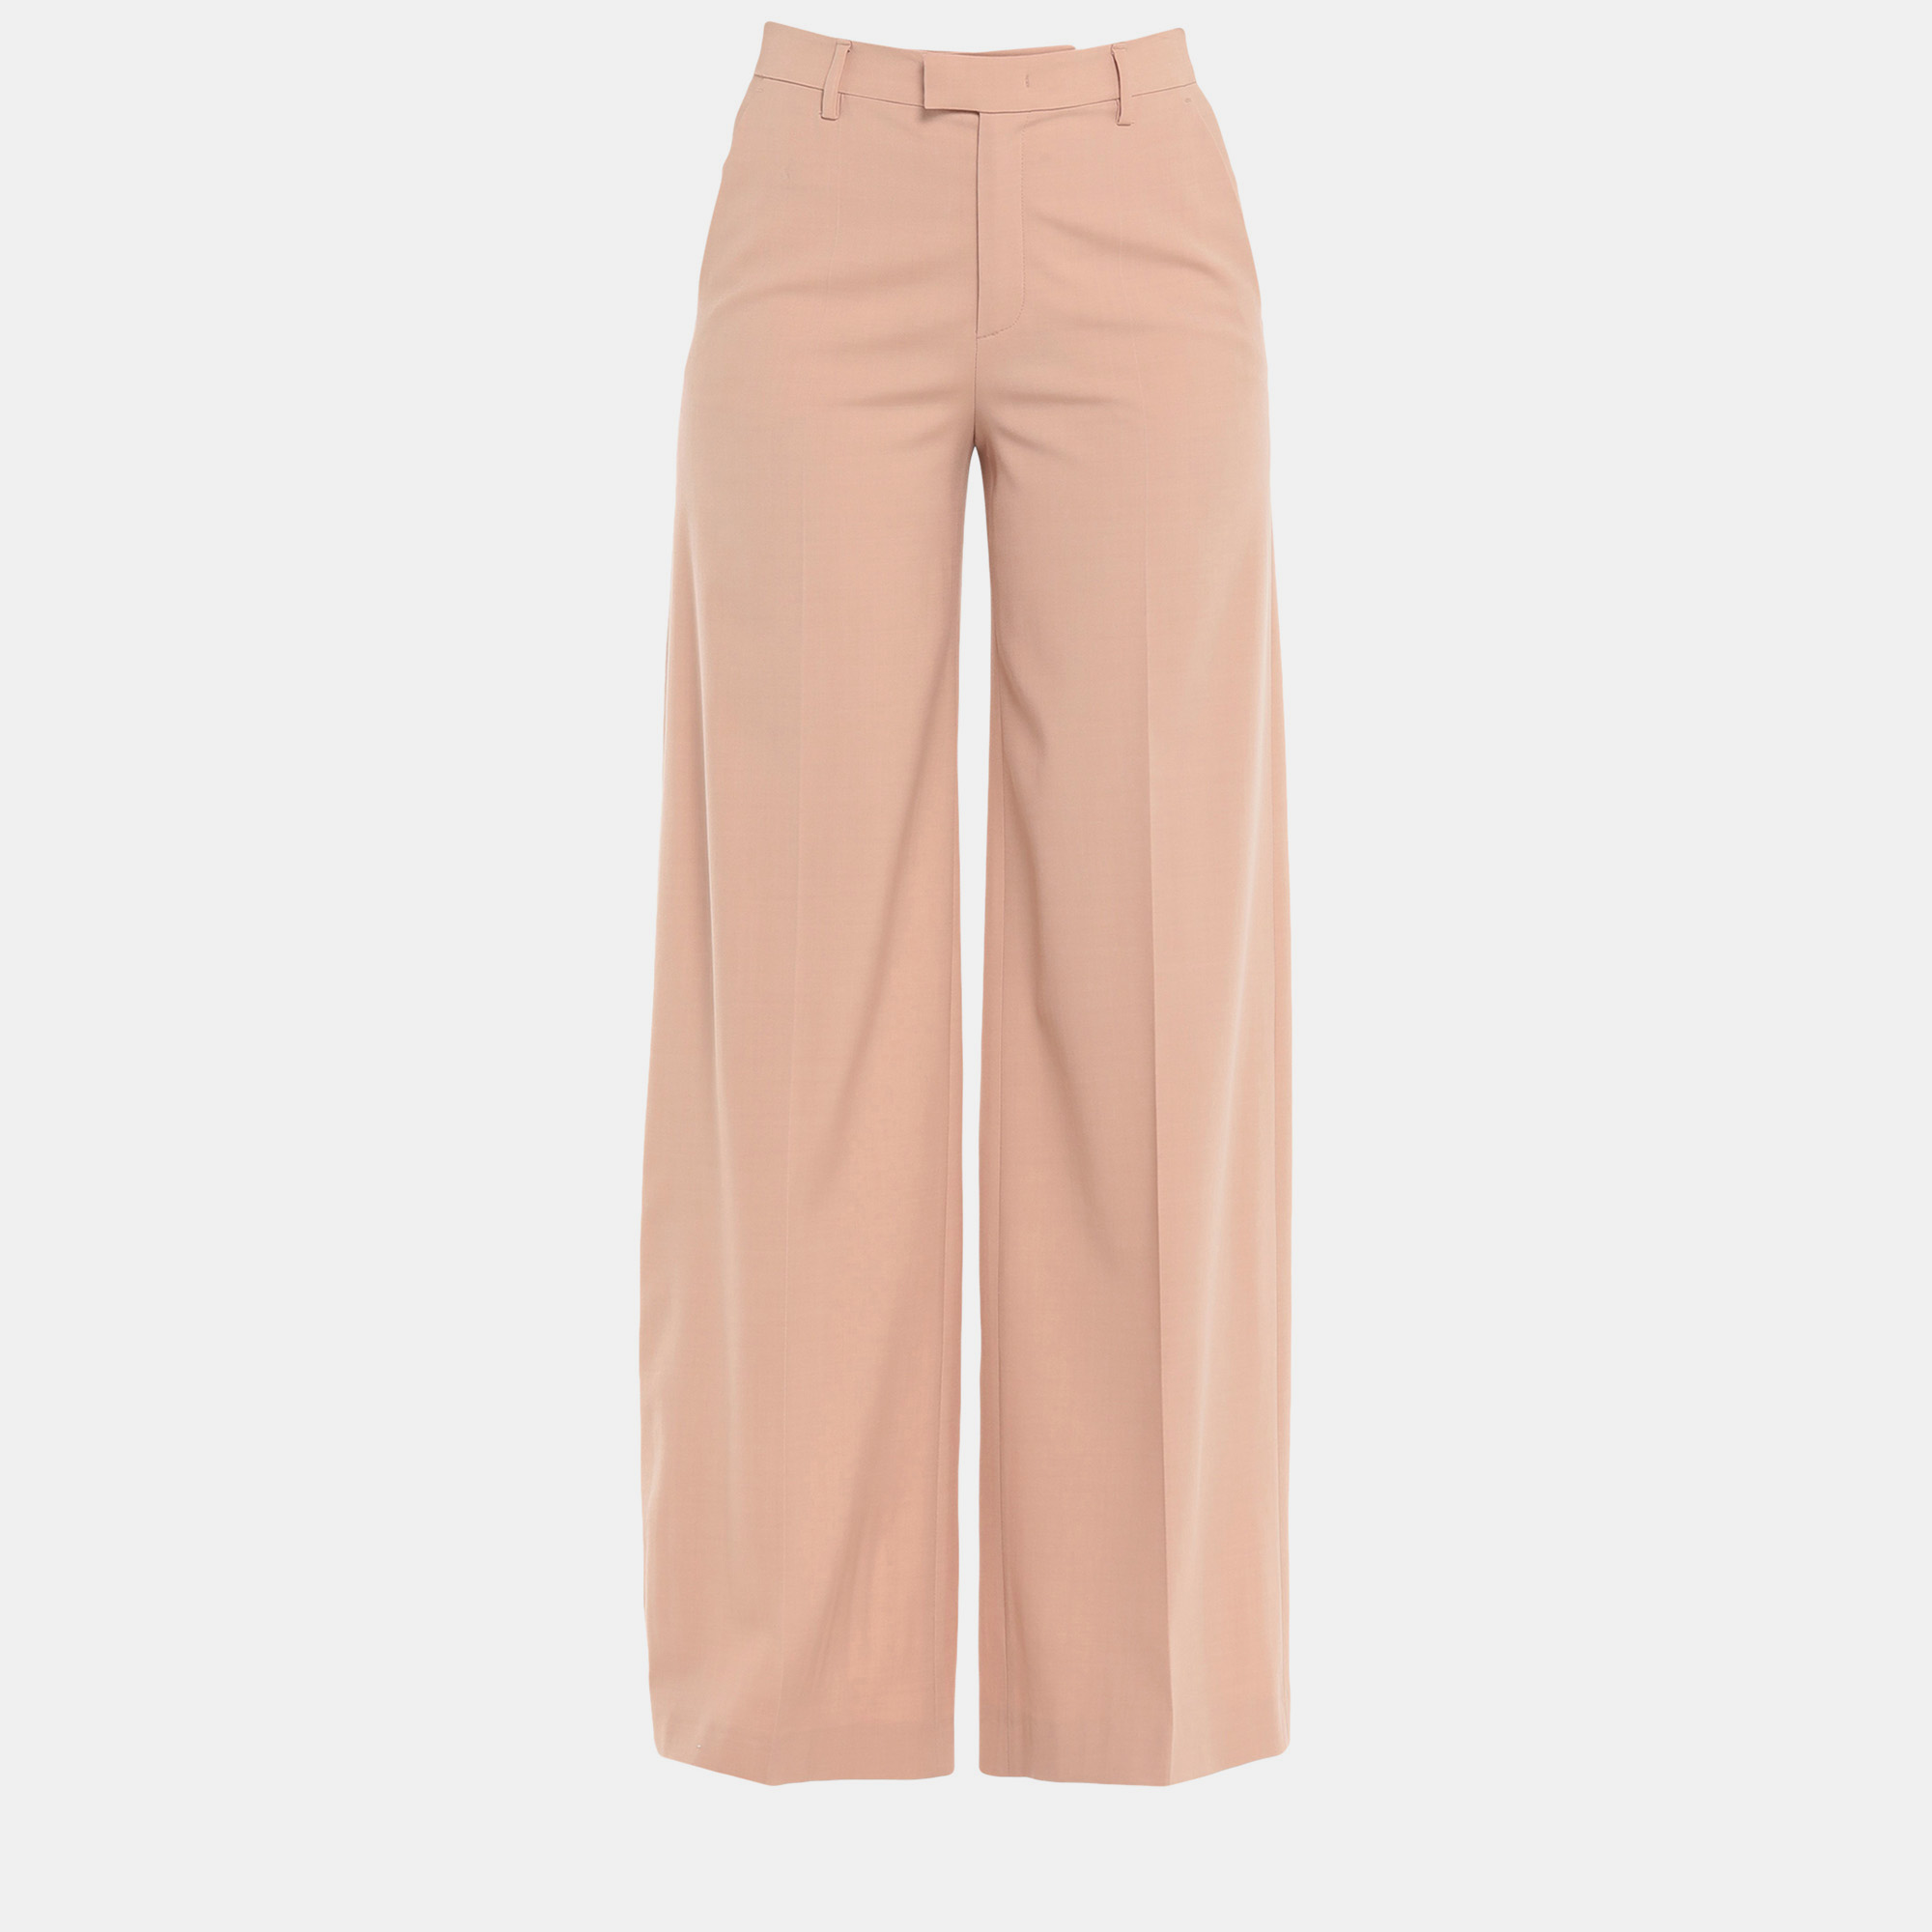 Red valentino pink wool blend wide leg pants s (it 38)